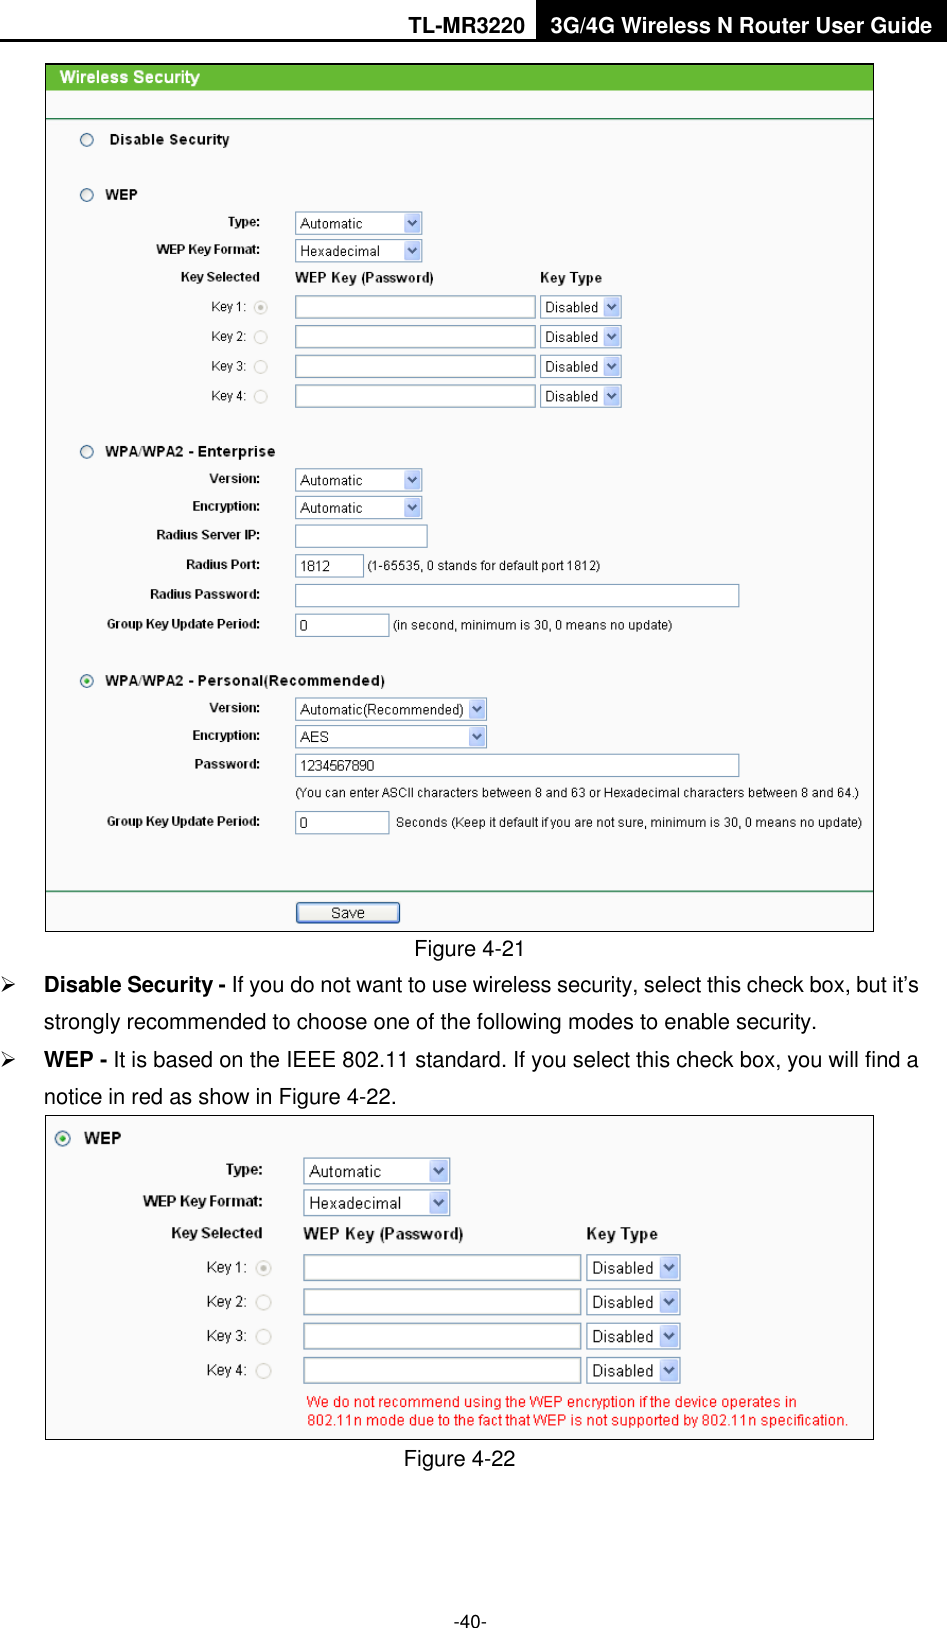 TL-MR3220 3G/4G Wireless N Router User Guide  -40-  Figure 4-21    Disable Security - If you do not want to use wireless security, select this check box, but it’s strongly recommended to choose one of the following modes to enable security.  WEP - It is based on the IEEE 802.11 standard. If you select this check box, you will find a notice in red as show in Figure 4-22.    Figure 4-22 